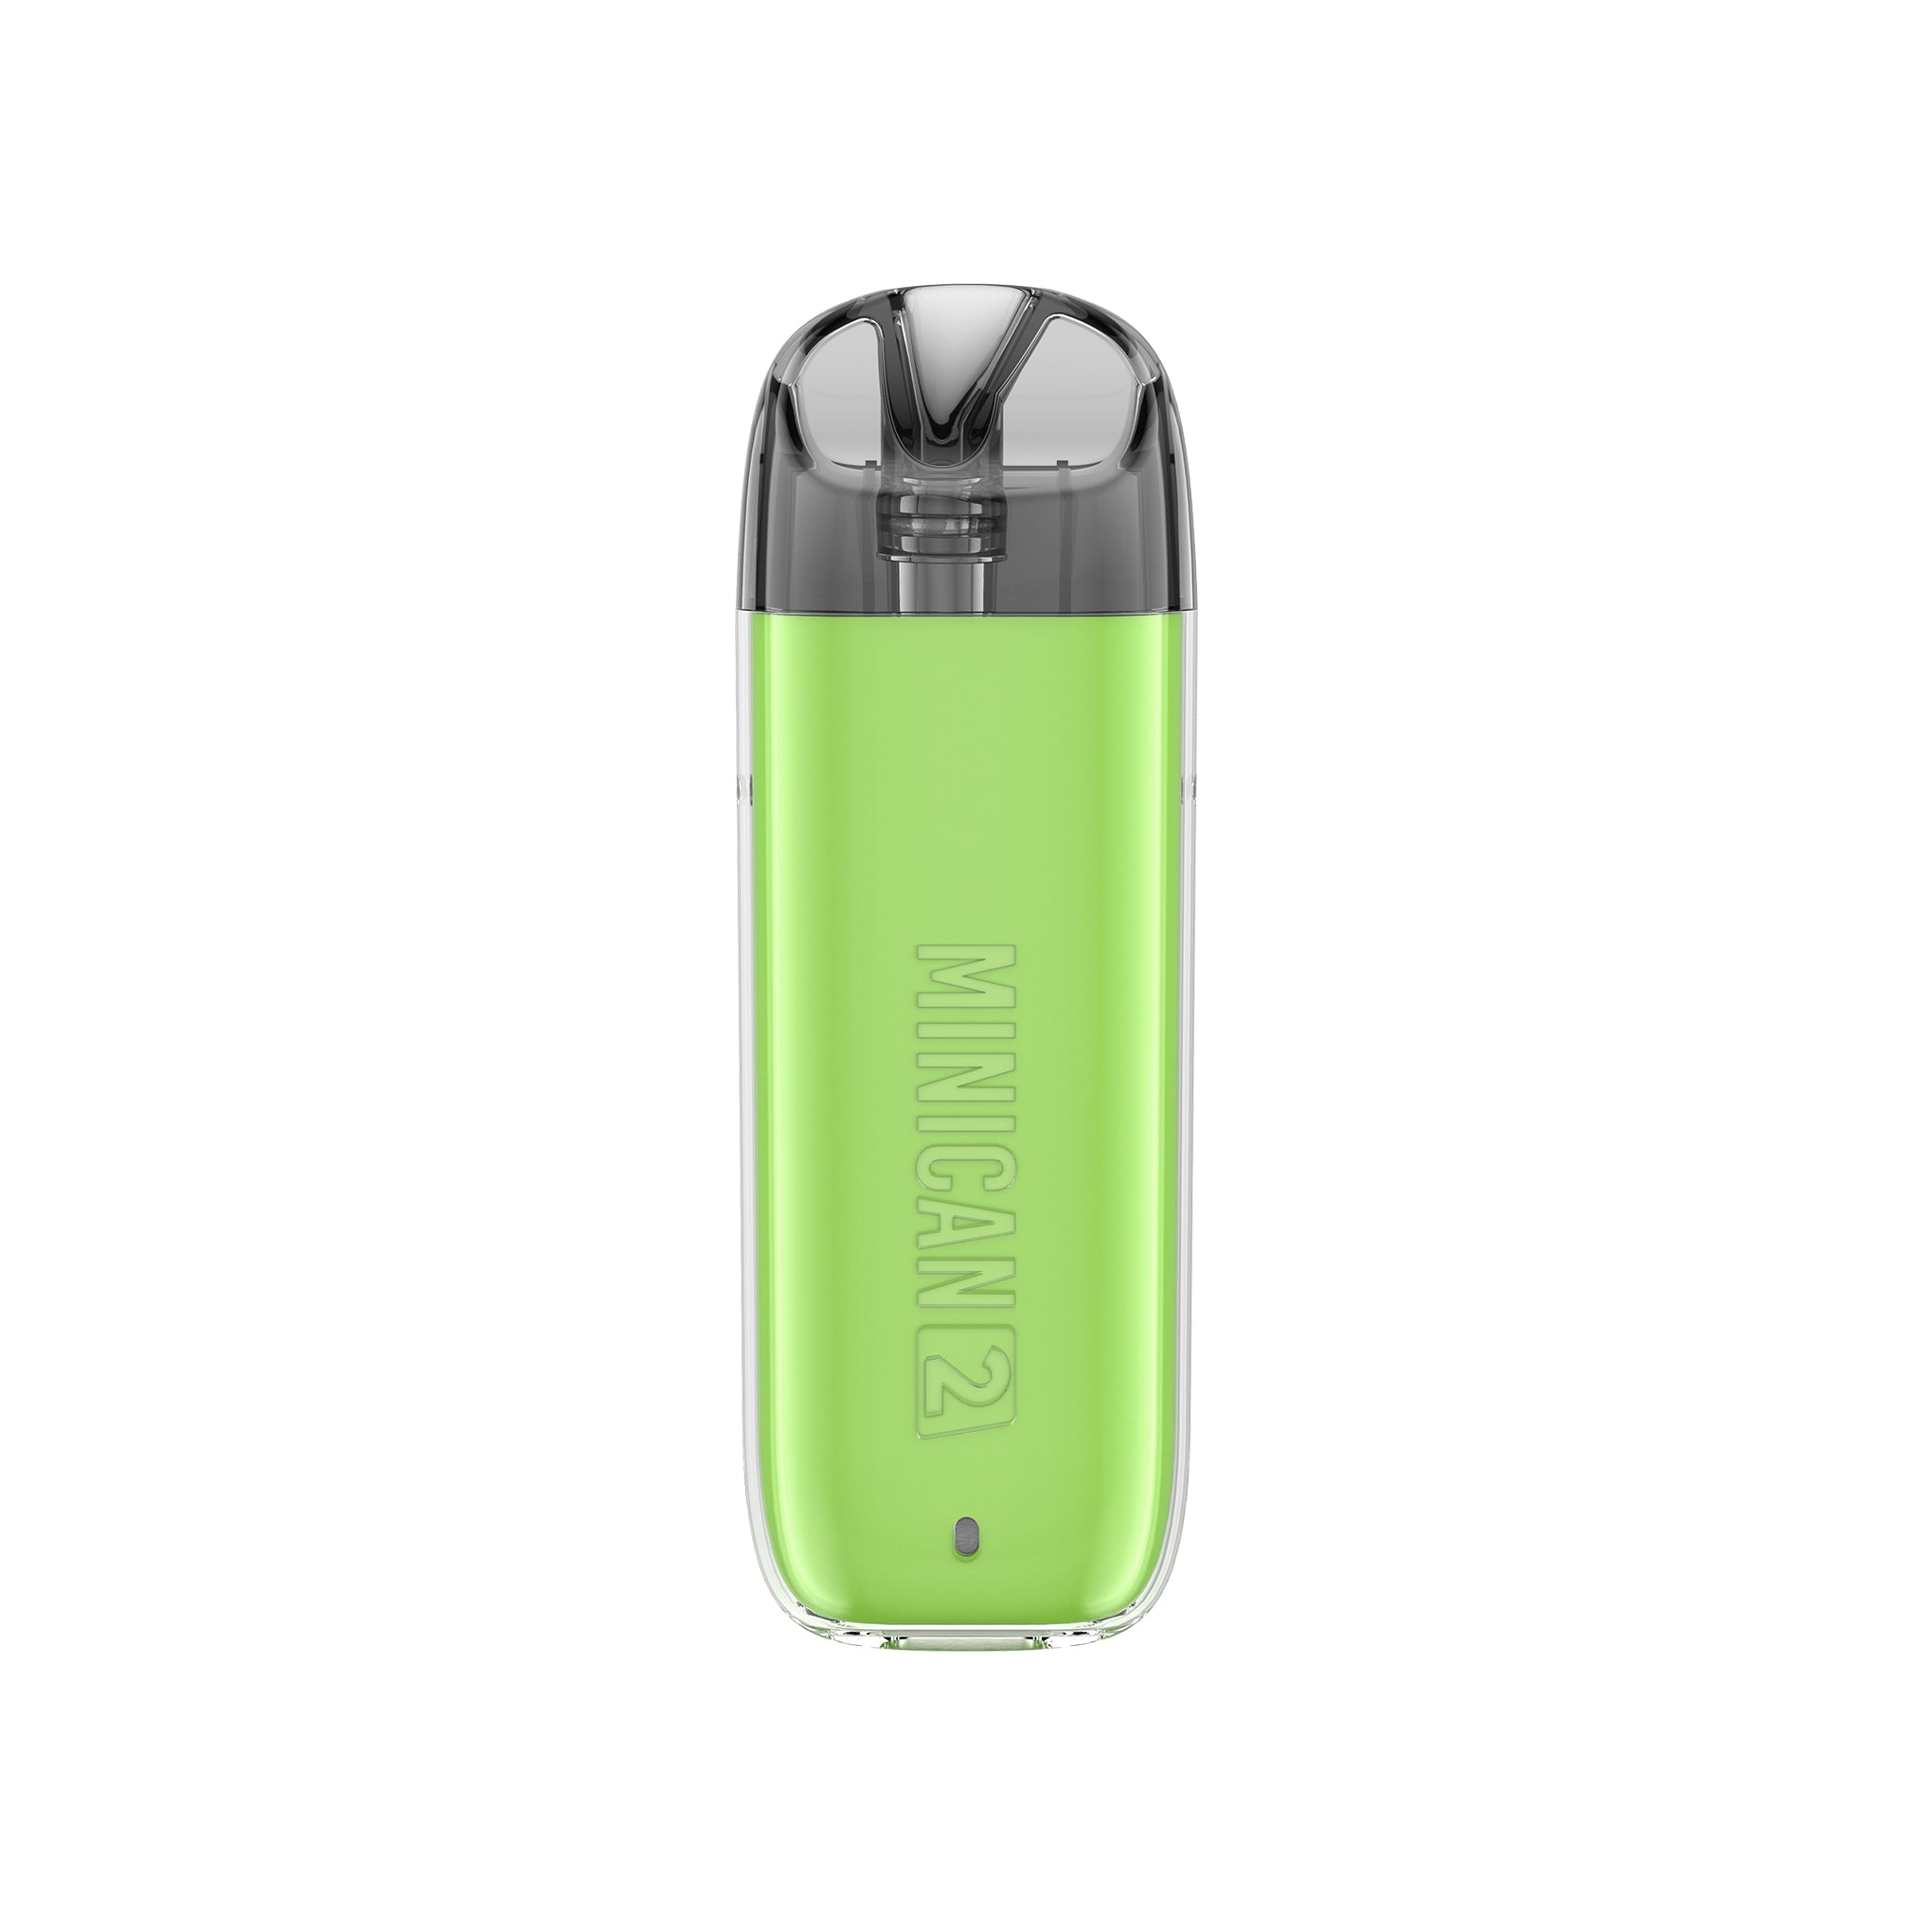 Aspire Minican 2 Kit Lime Green 